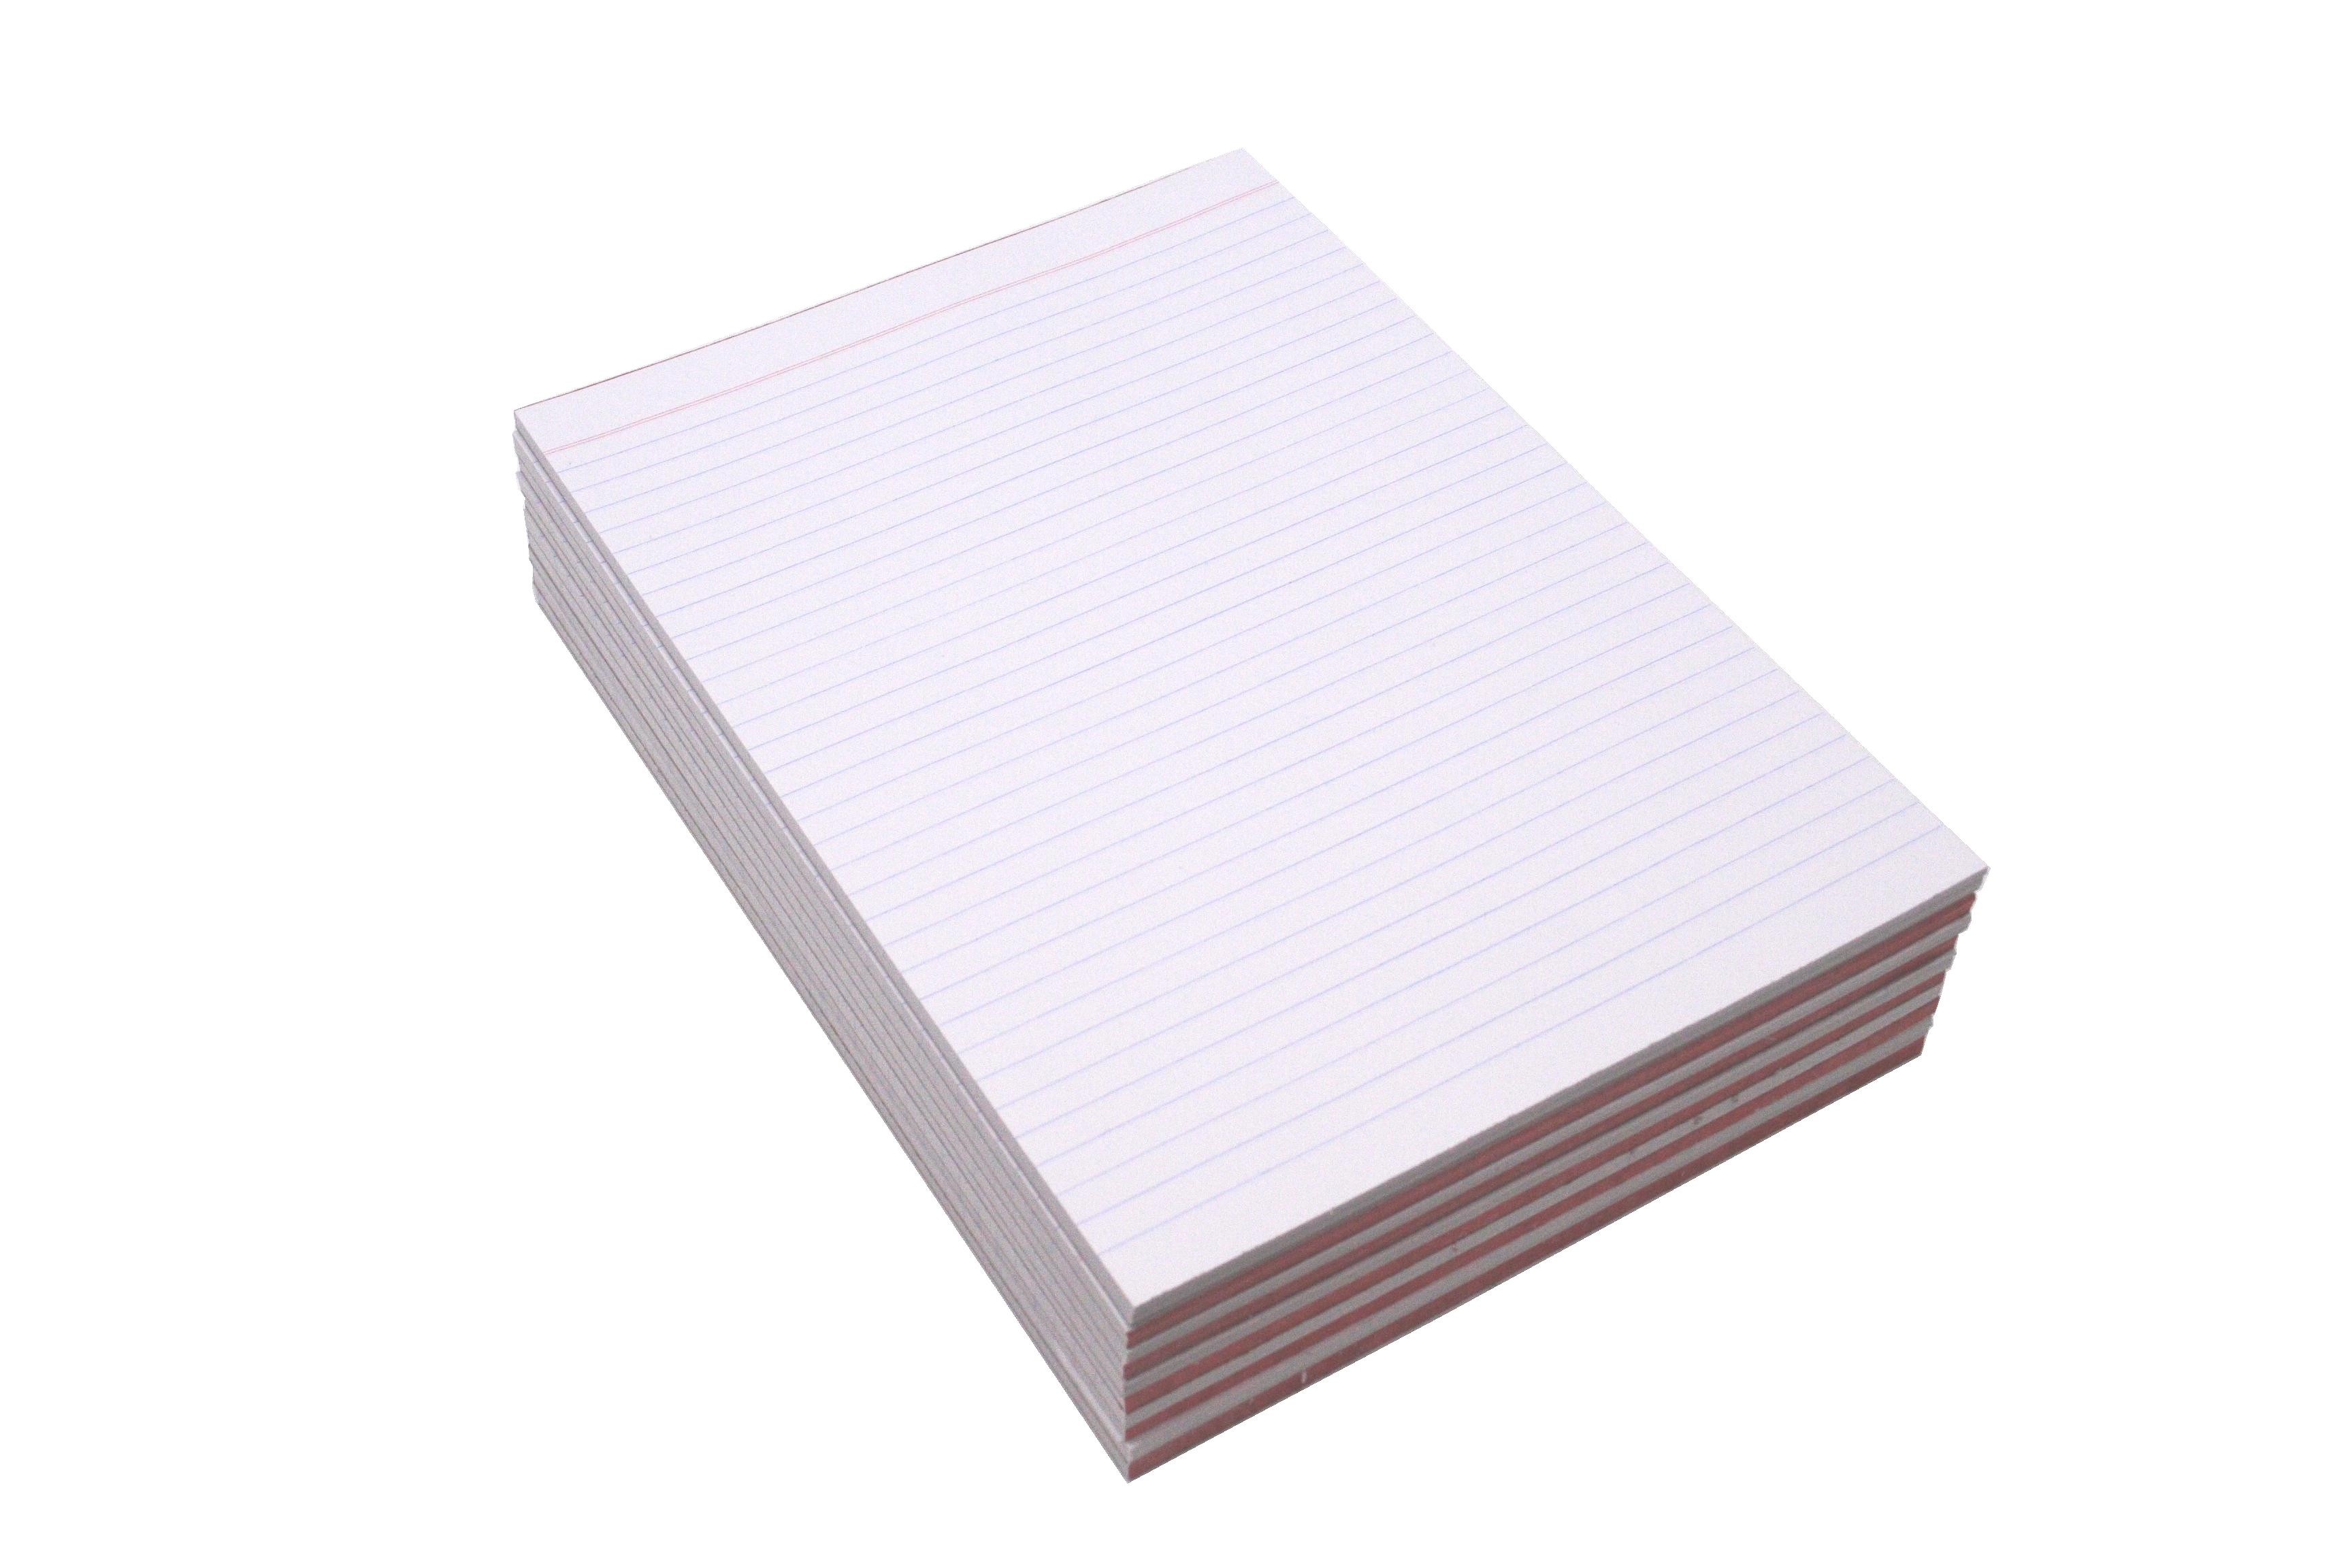 RULED SUPER BANK PAD A4 WHITE (PKT 10)  (price excludes gst)